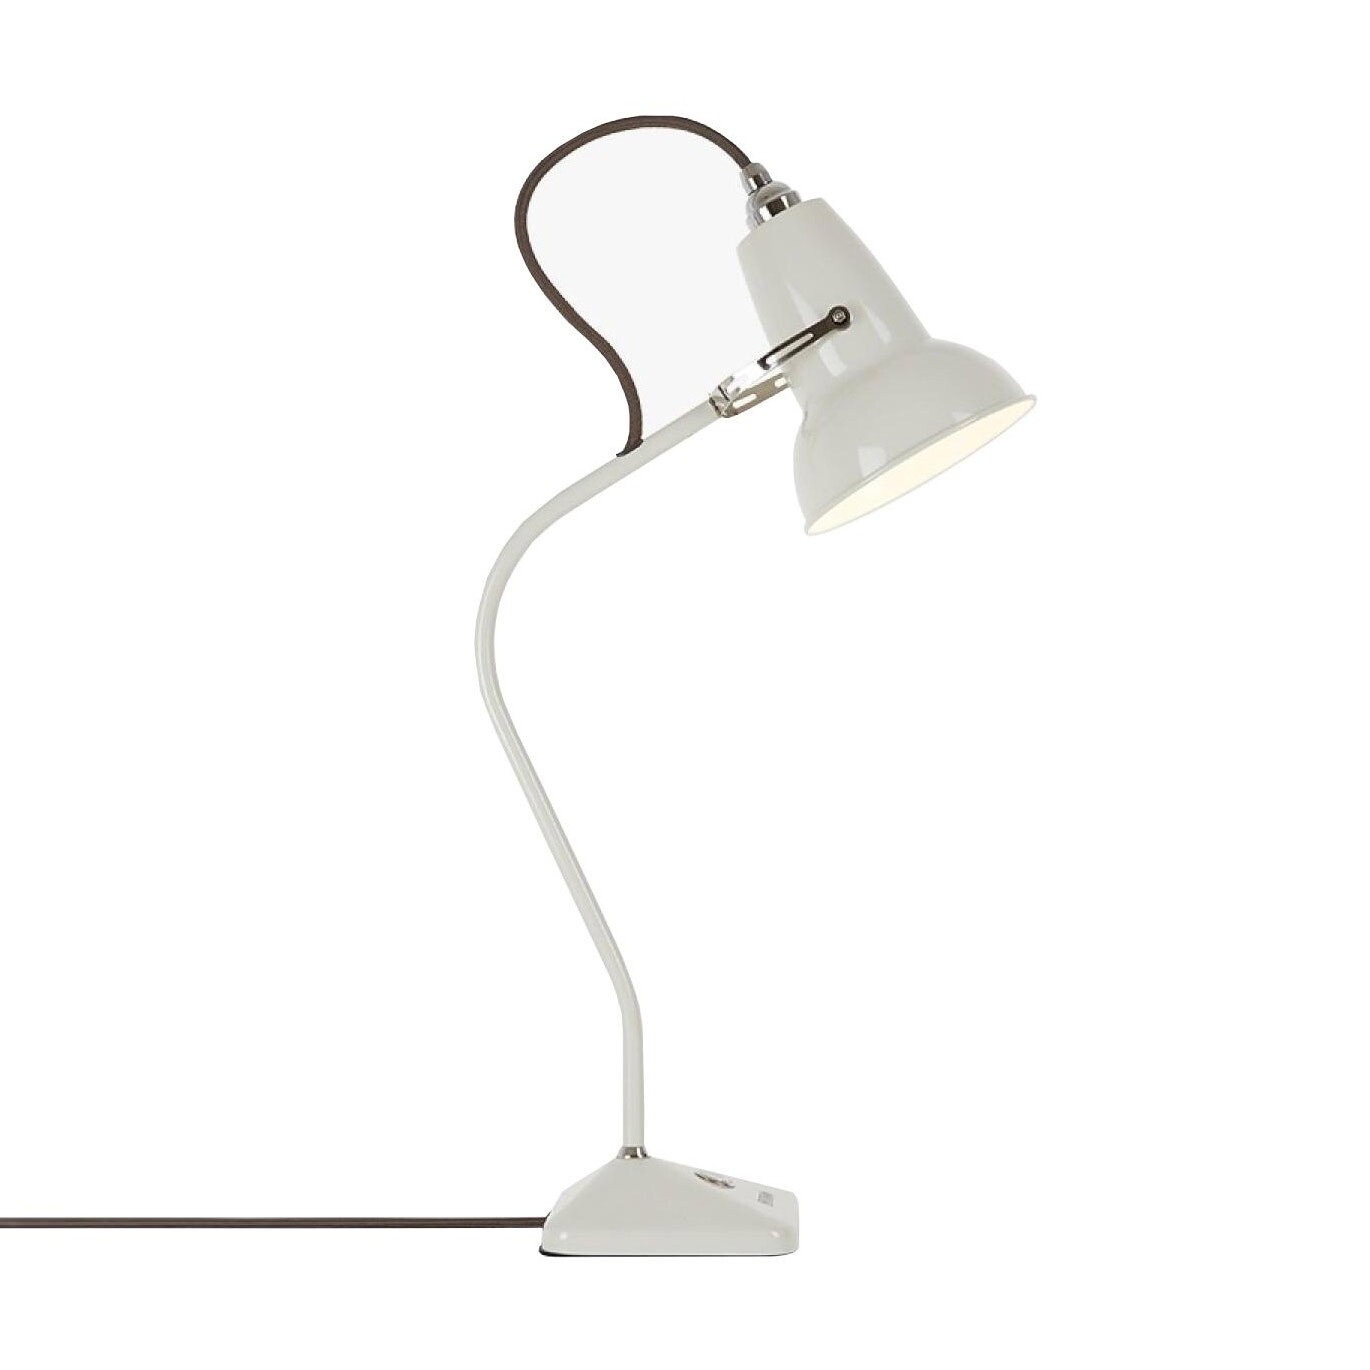 Linen White with Grey Cable Anglepoise Original 1227 Mini Table Lamp